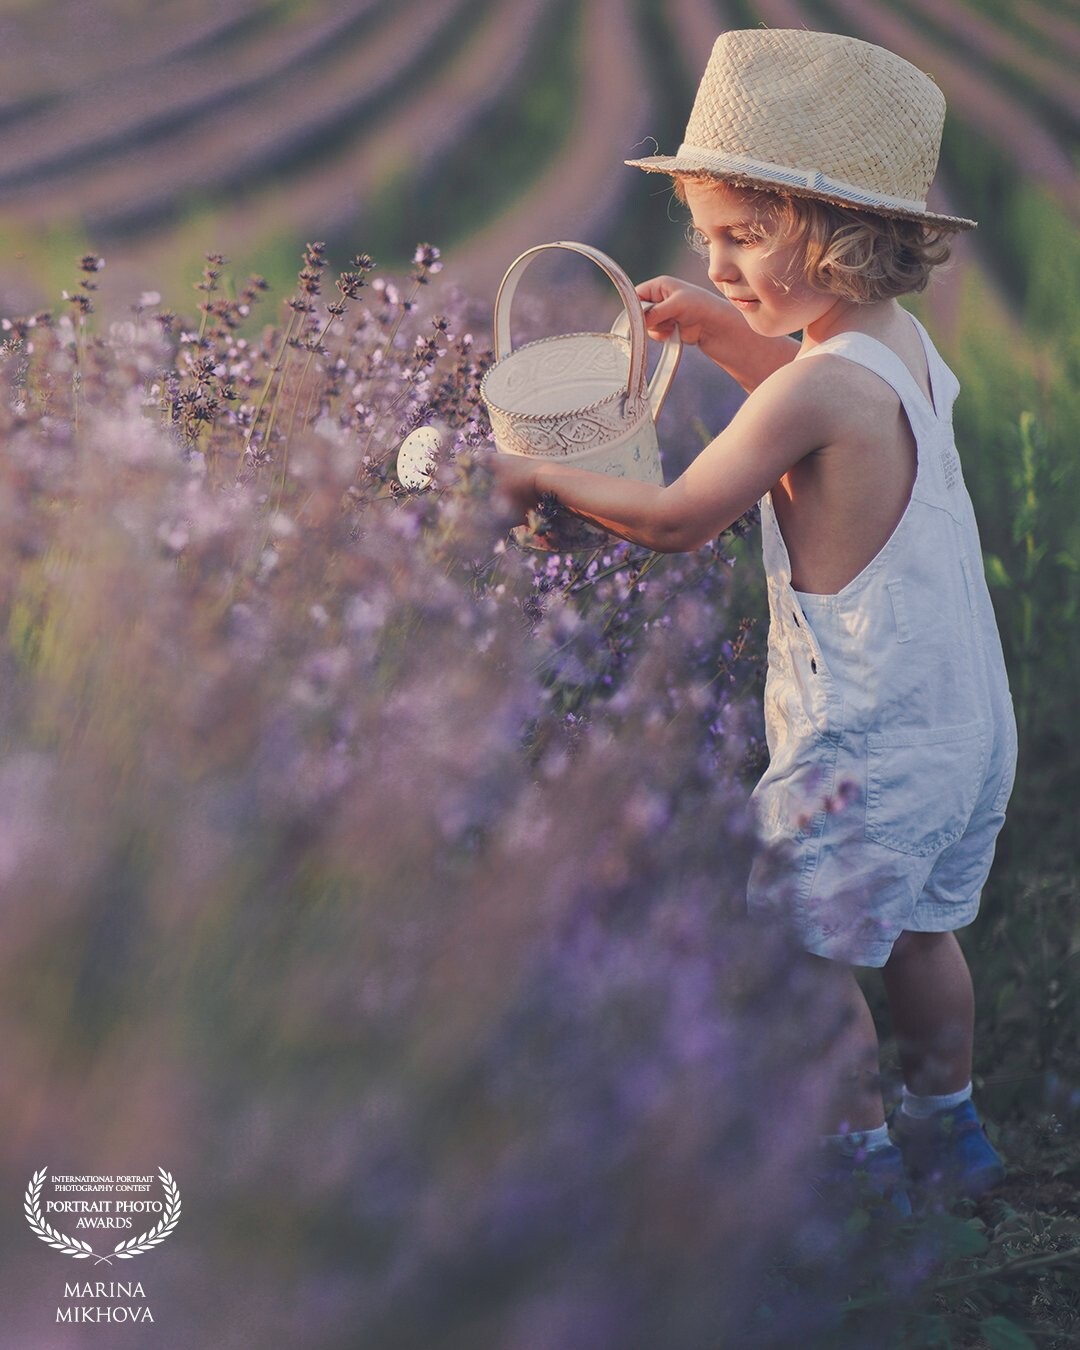 It’s so much easier to photograph children when they have a job to do :))) I brought several bottles of water to make him truly water the lavender!